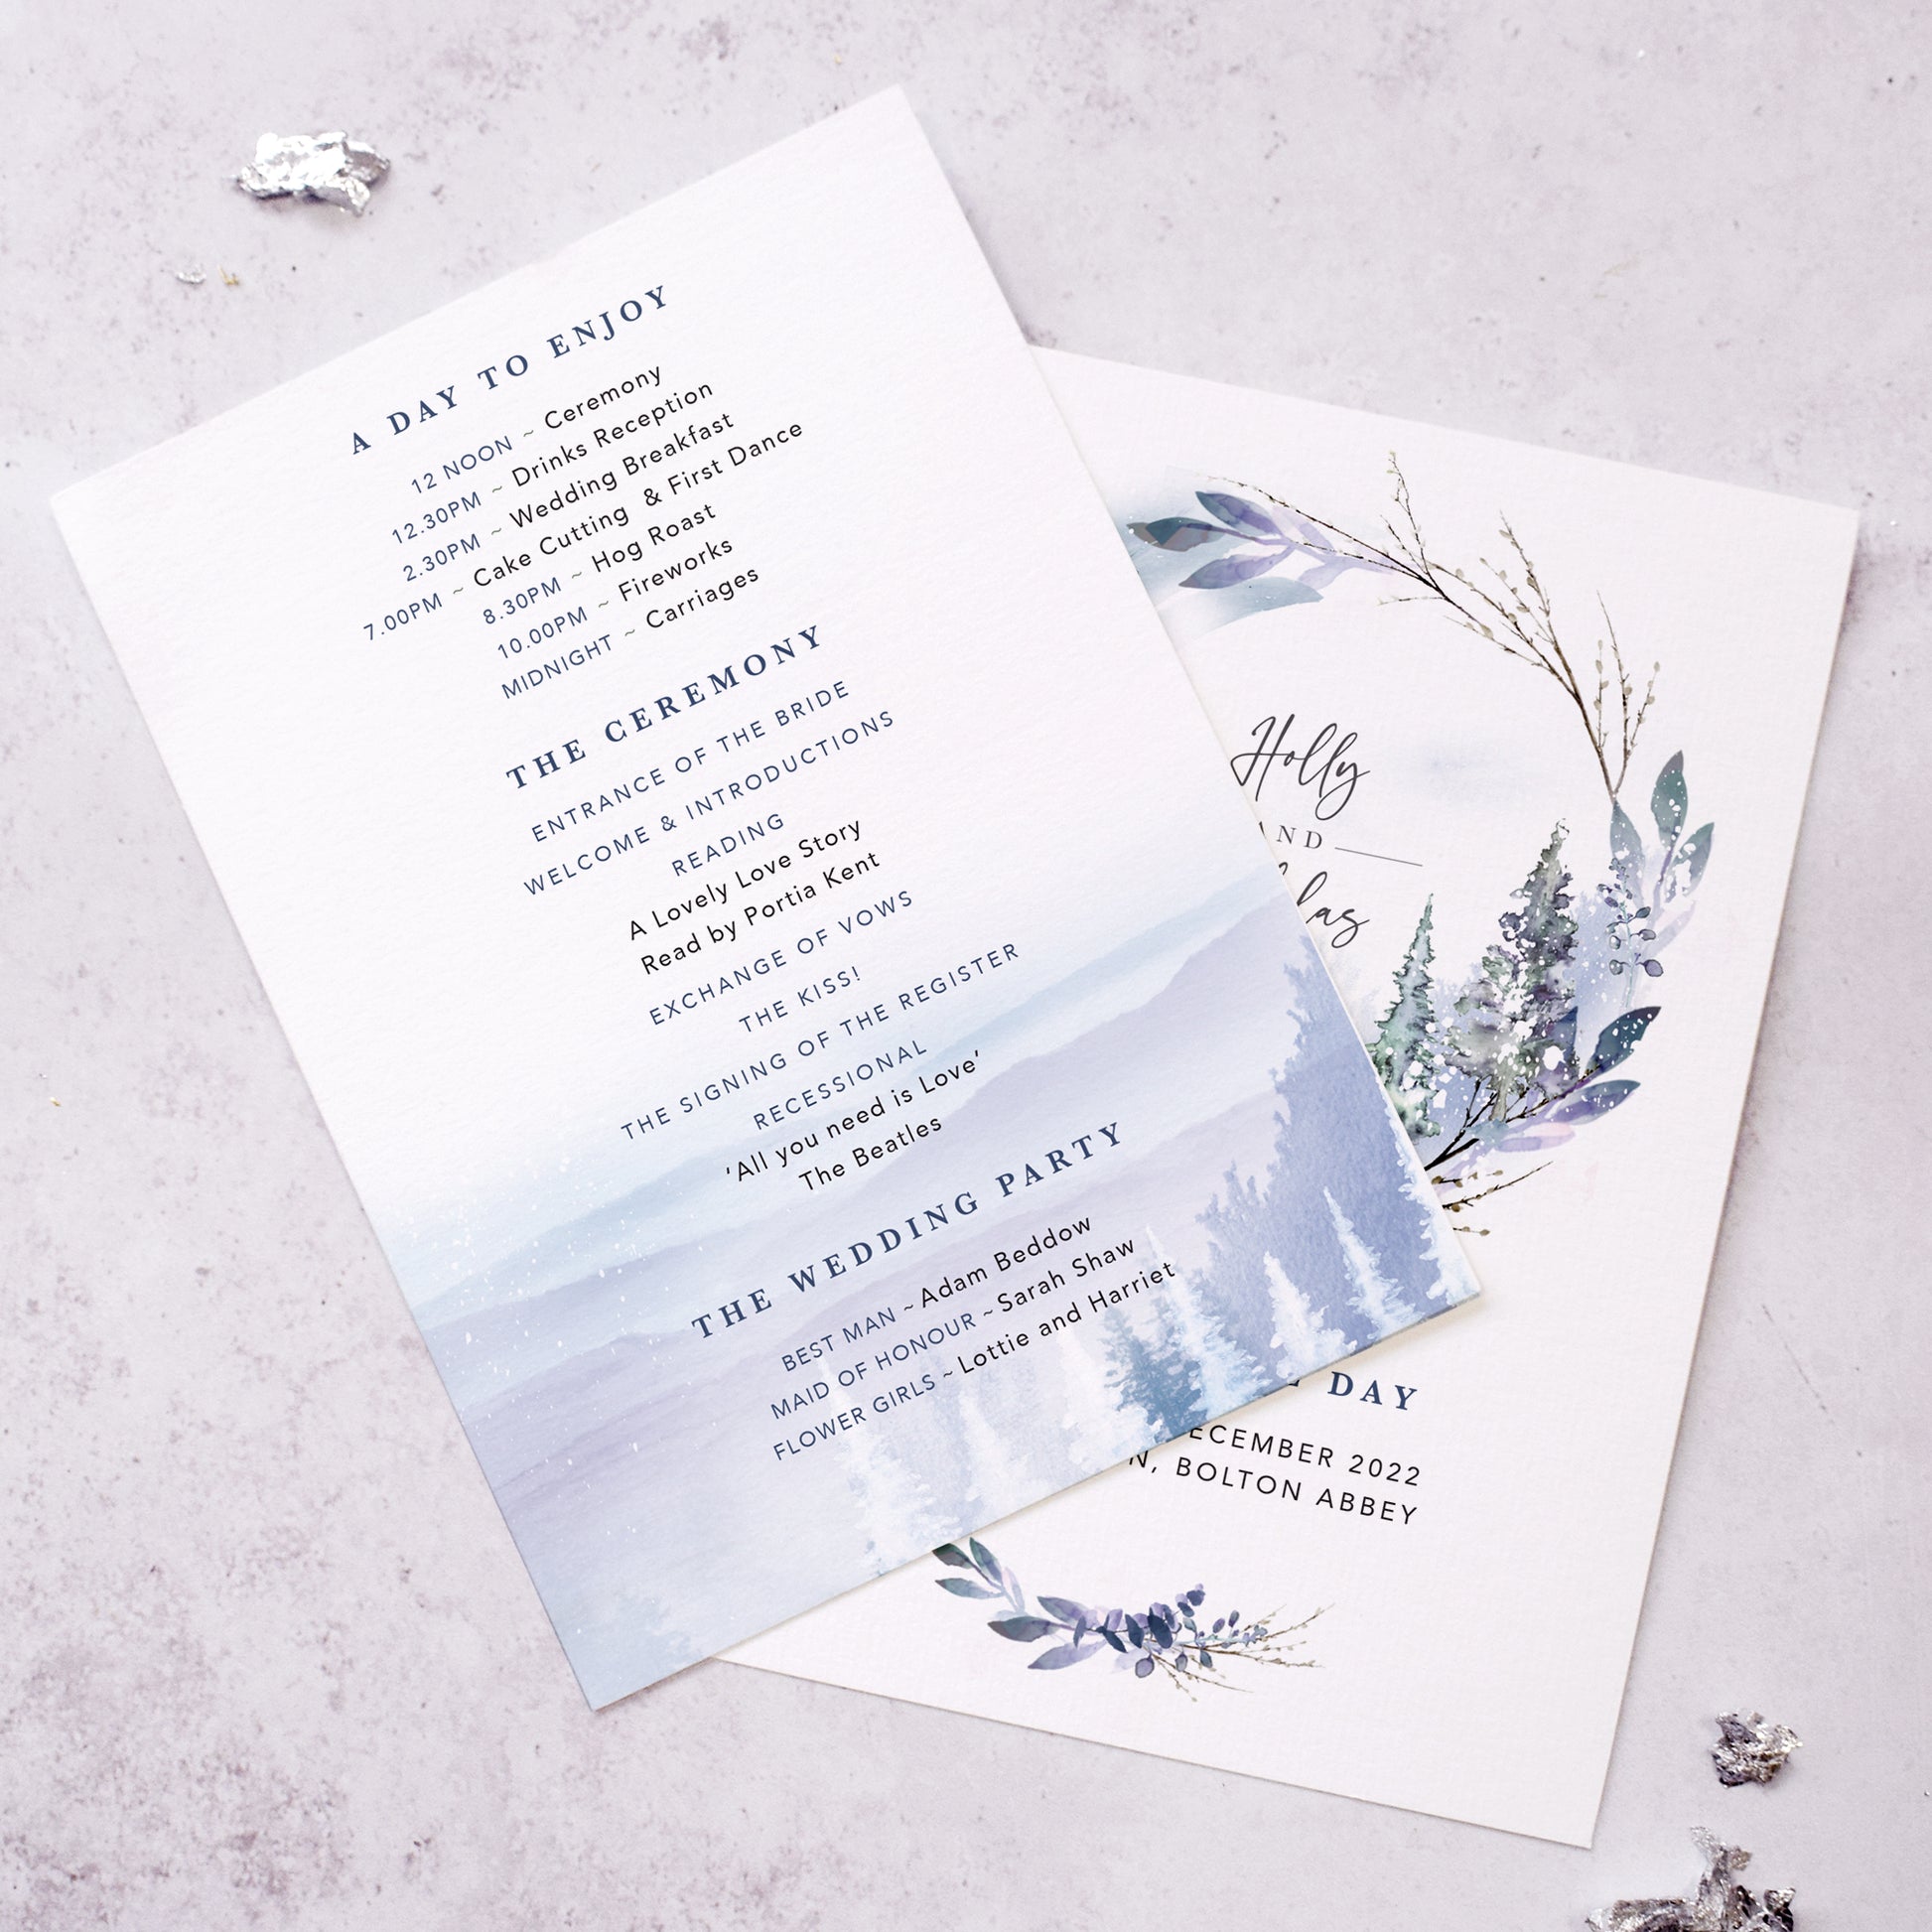 Order of the Day for a winter wedding